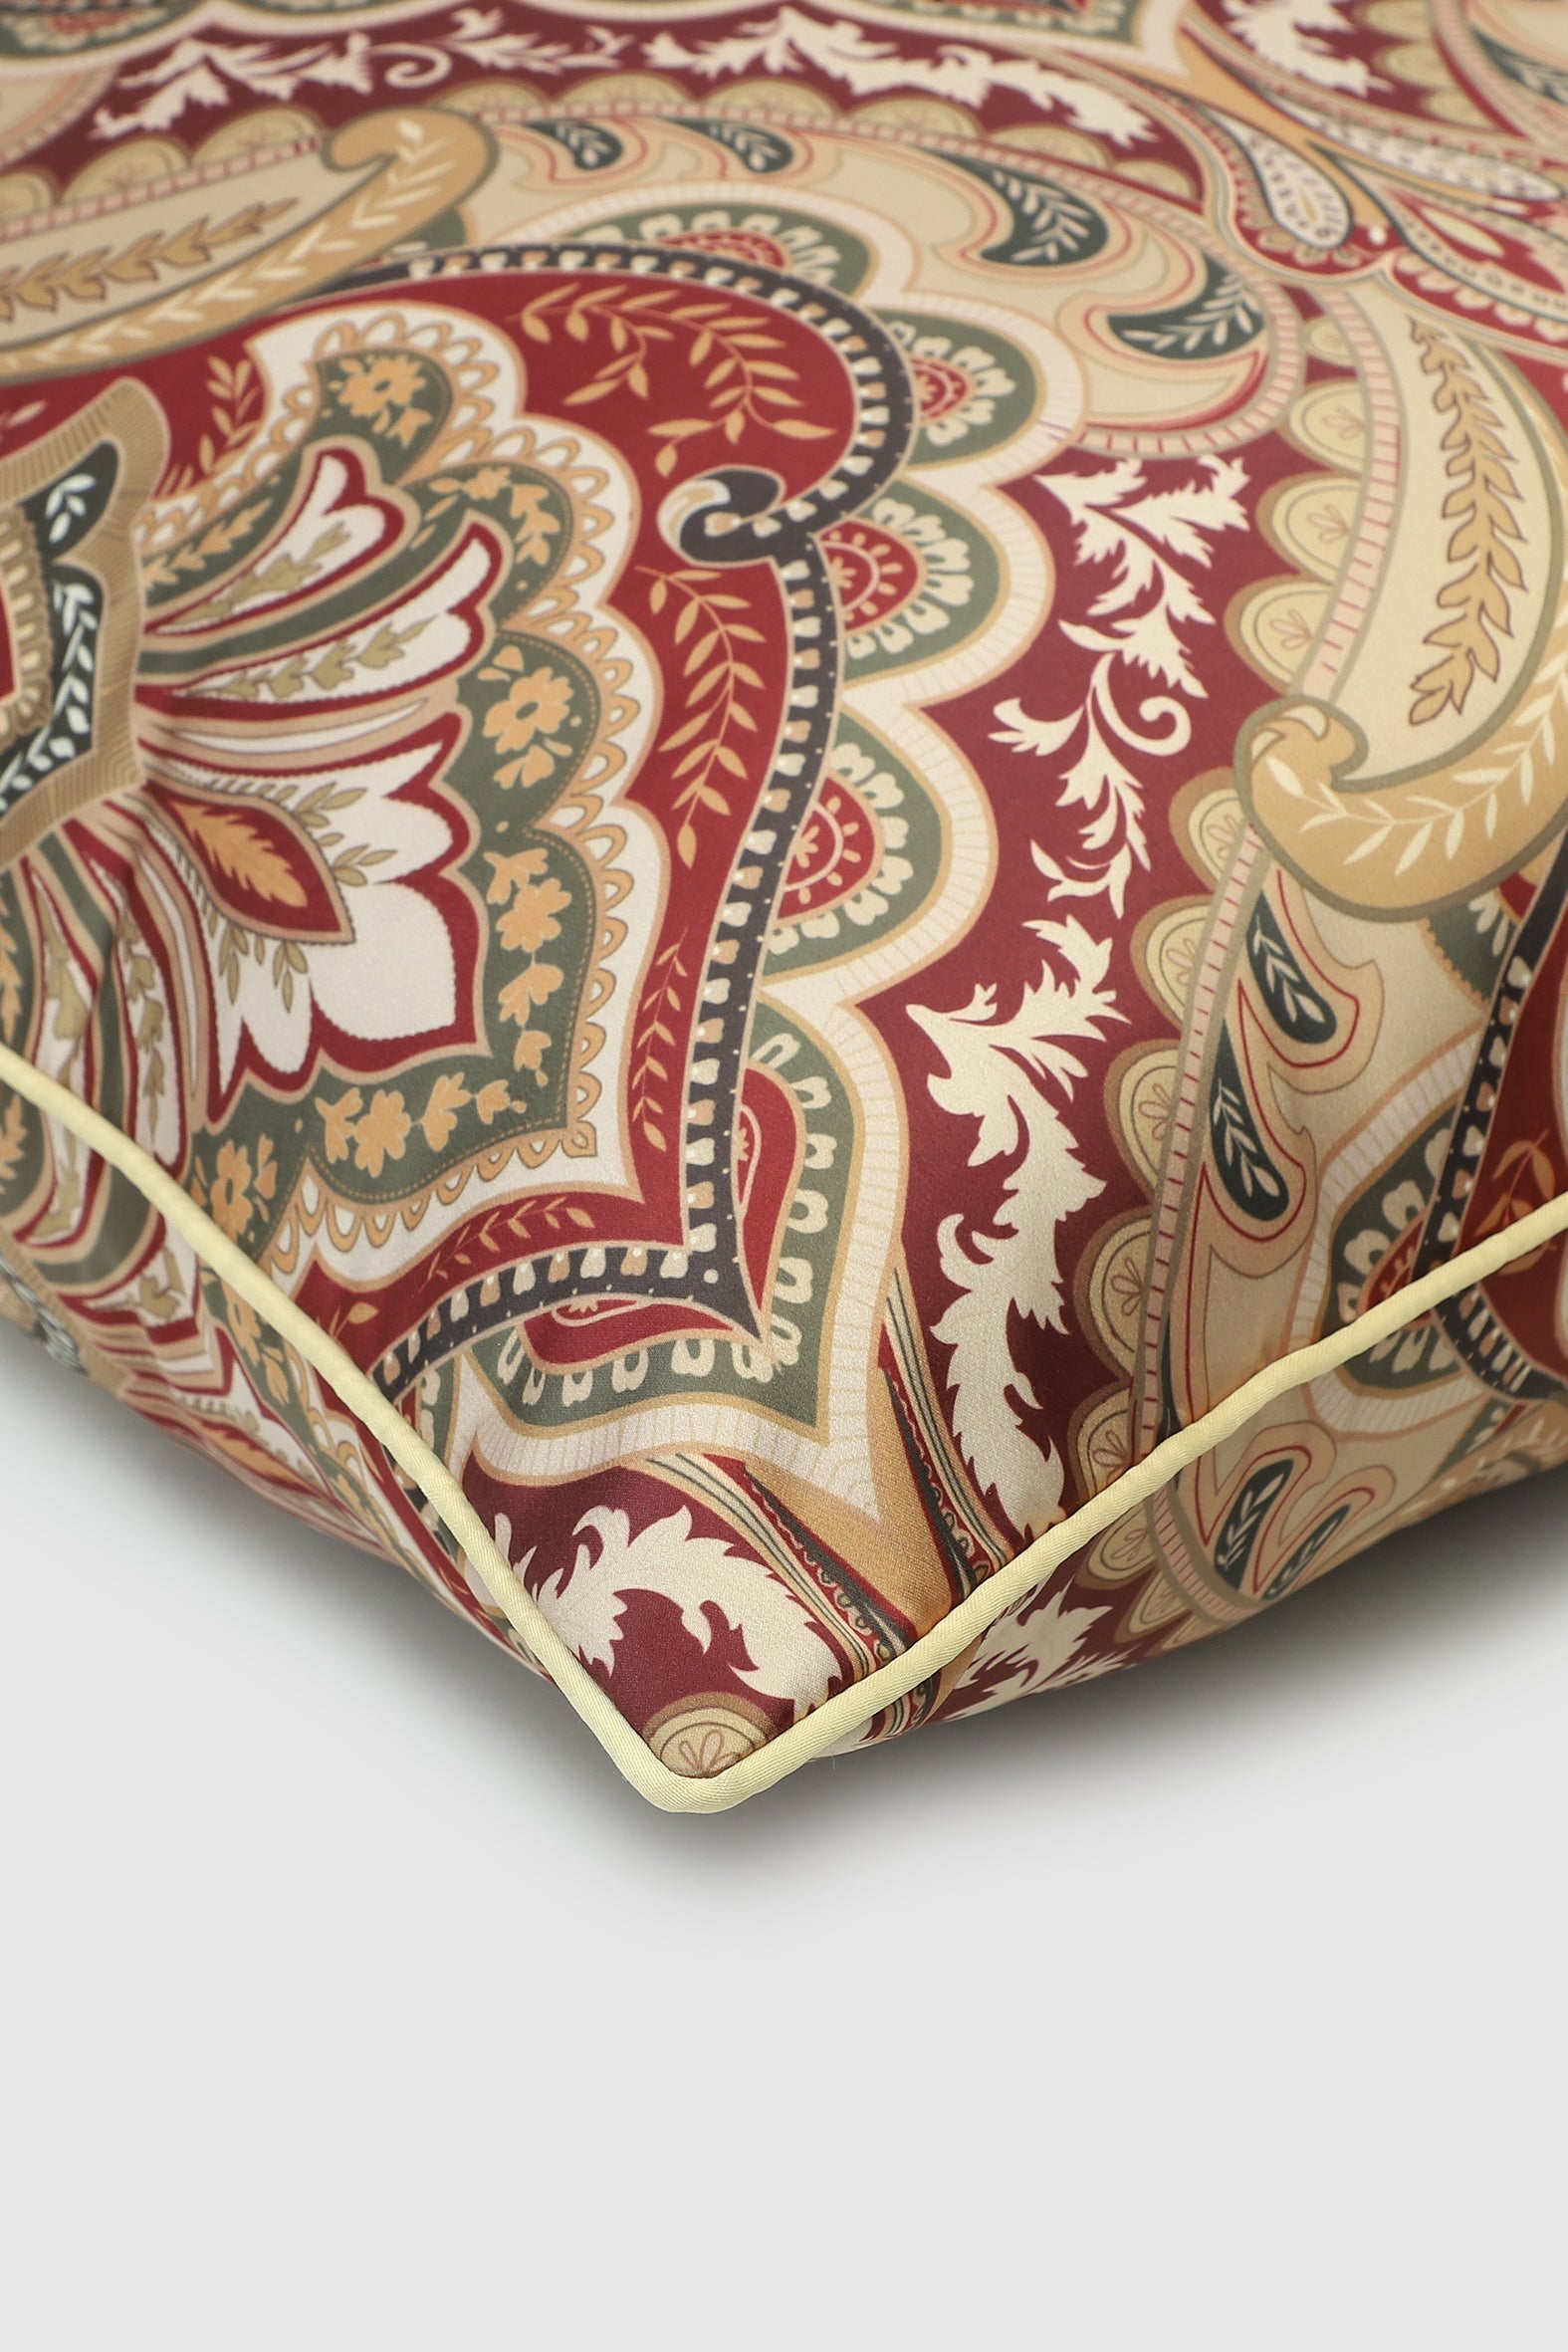 Rodeo Bliss Sateen Pillow Cover - Pillow Covers